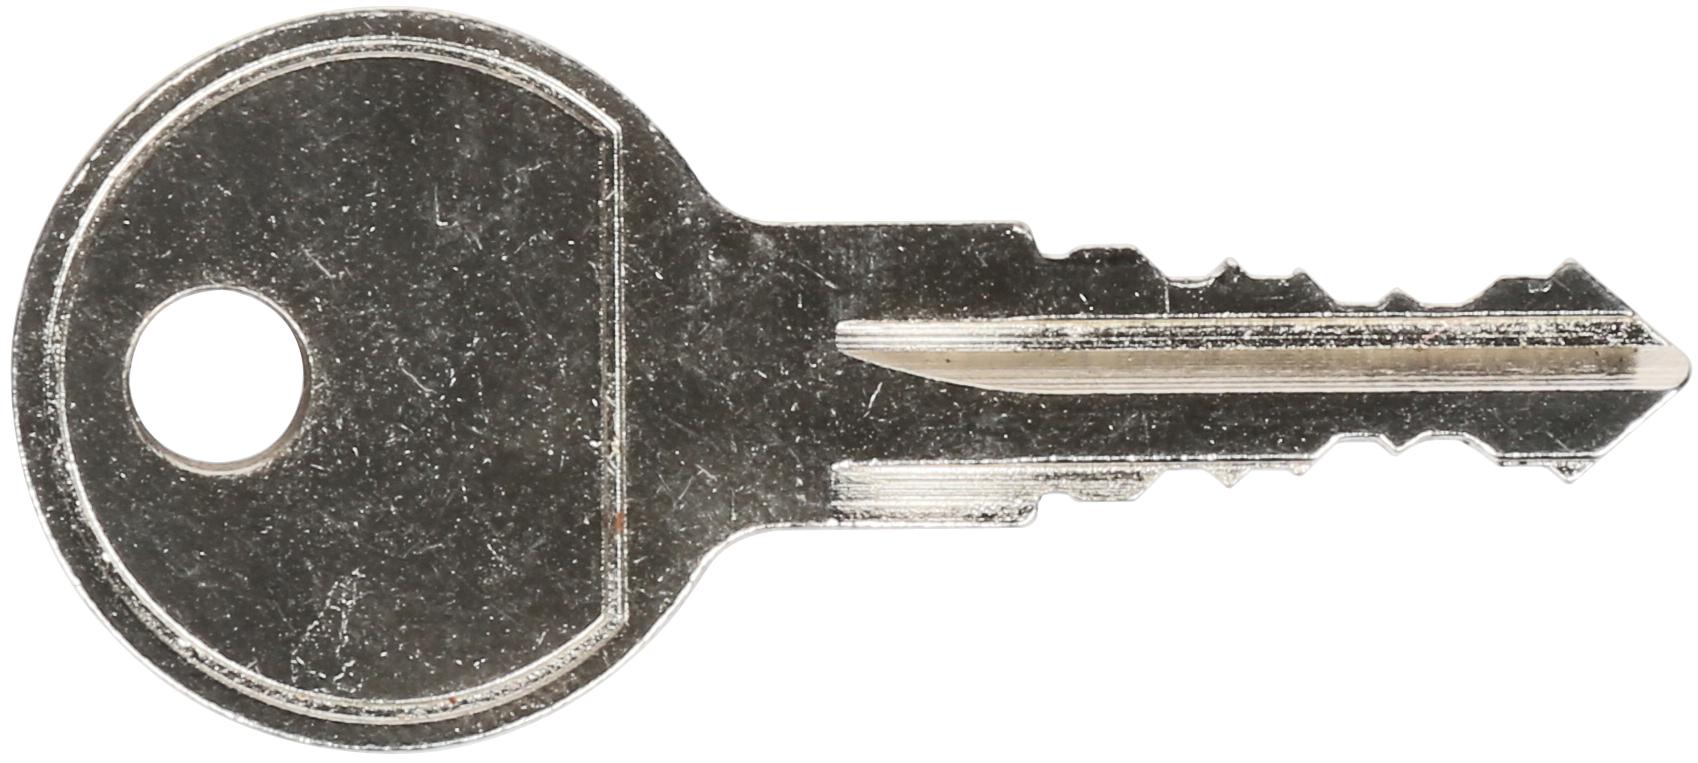 Spare Roof Box Key 174